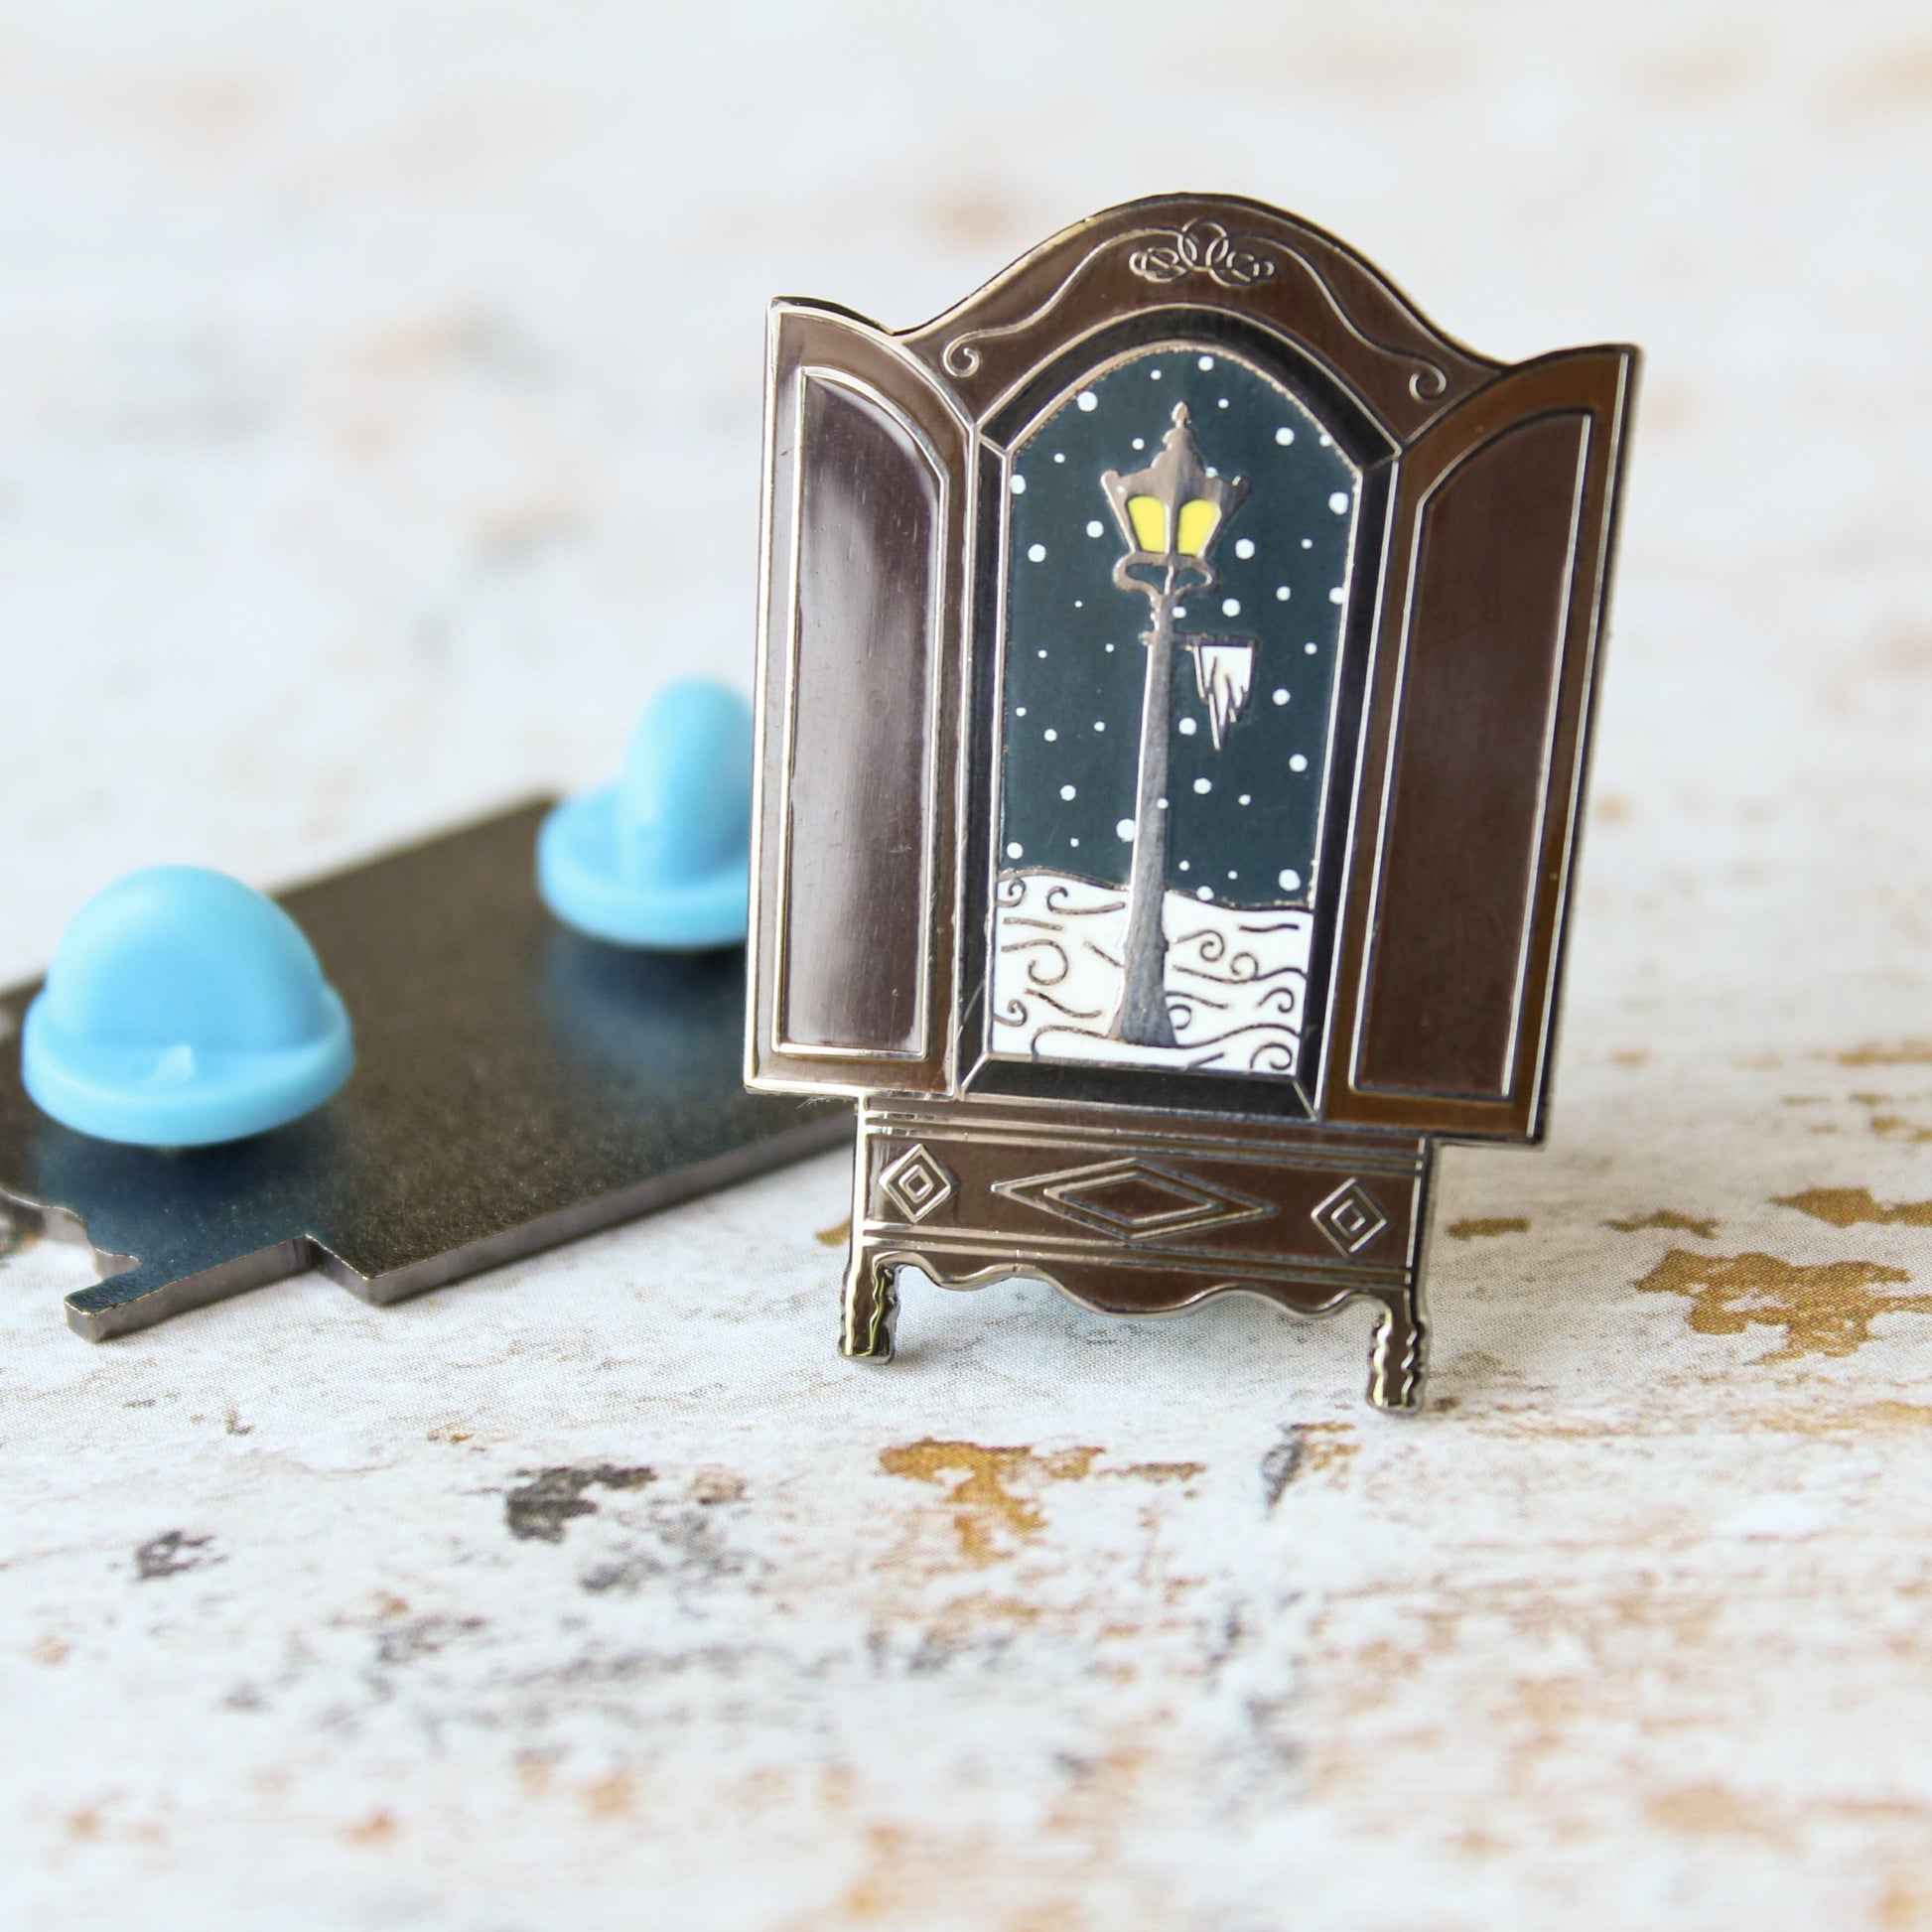 The lion the witch and the wardrobe snowy lantern in the wardrobe narnian enamel pin